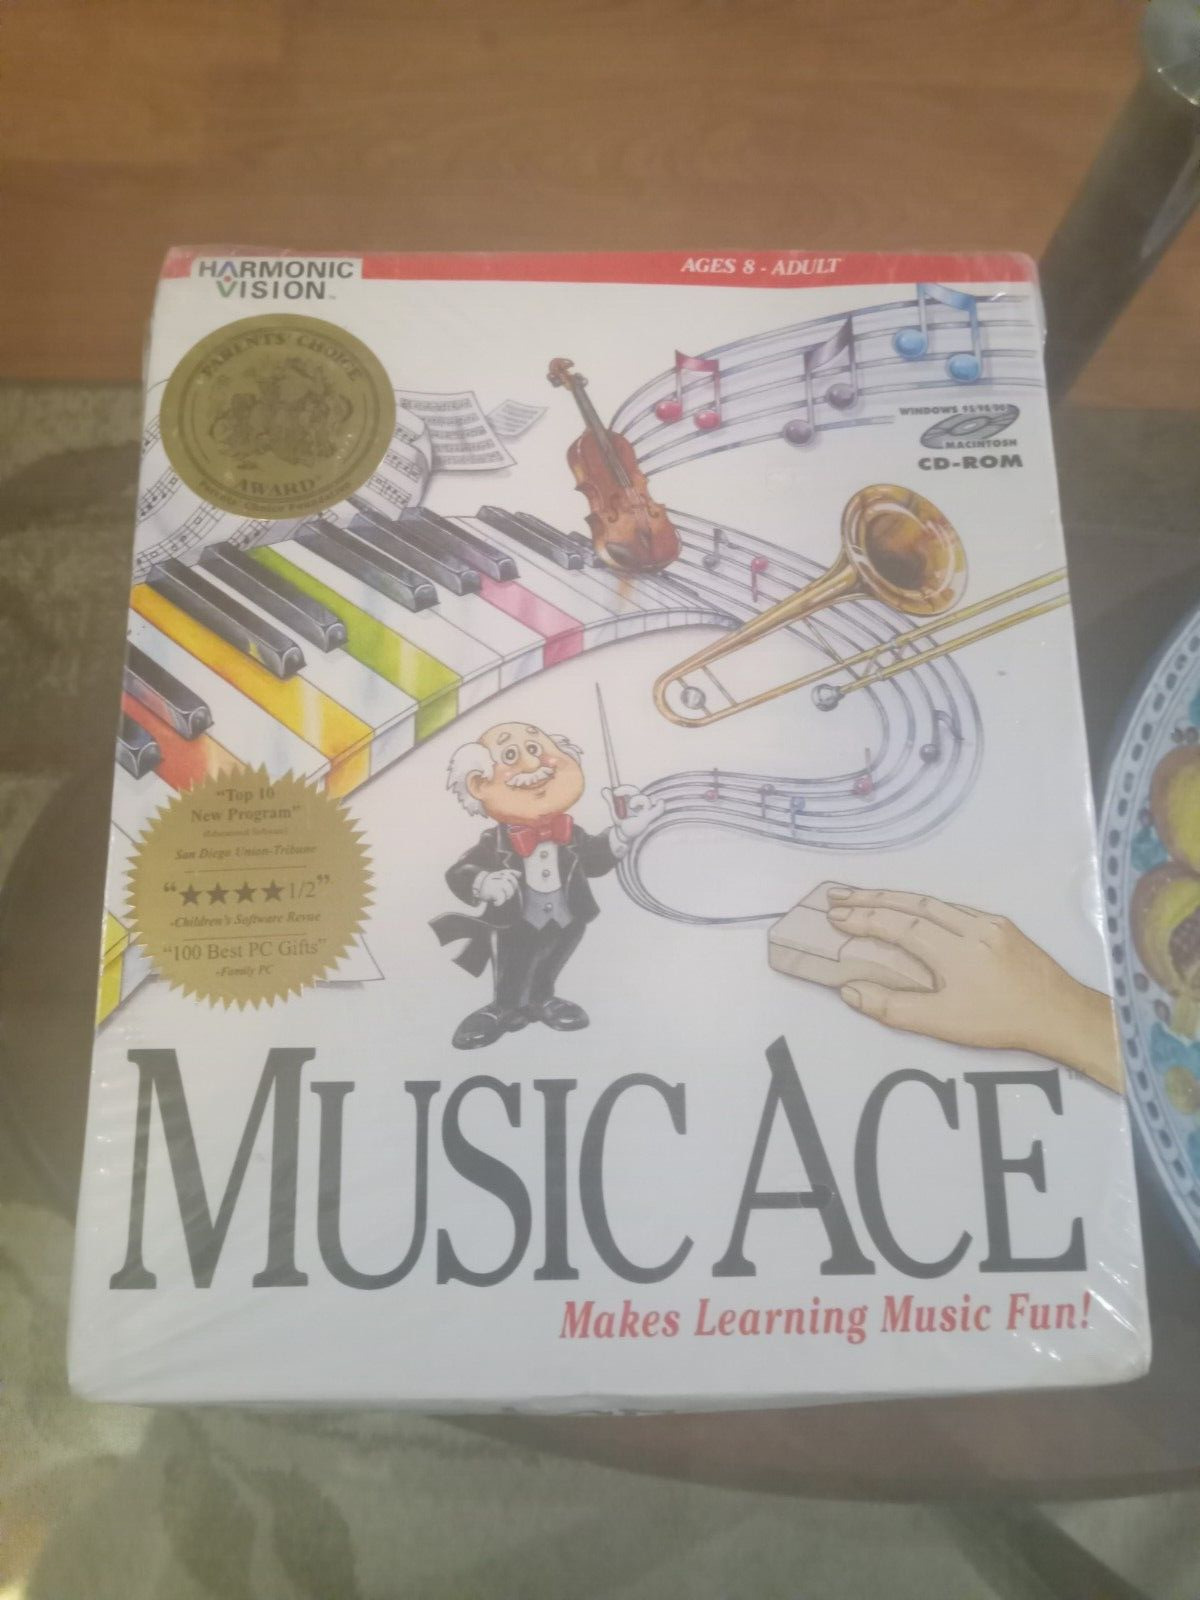 HARMONIC VISION MUSIC ACE MAKES LEARNING MUSIC FUN BRAND NEW IN BOX